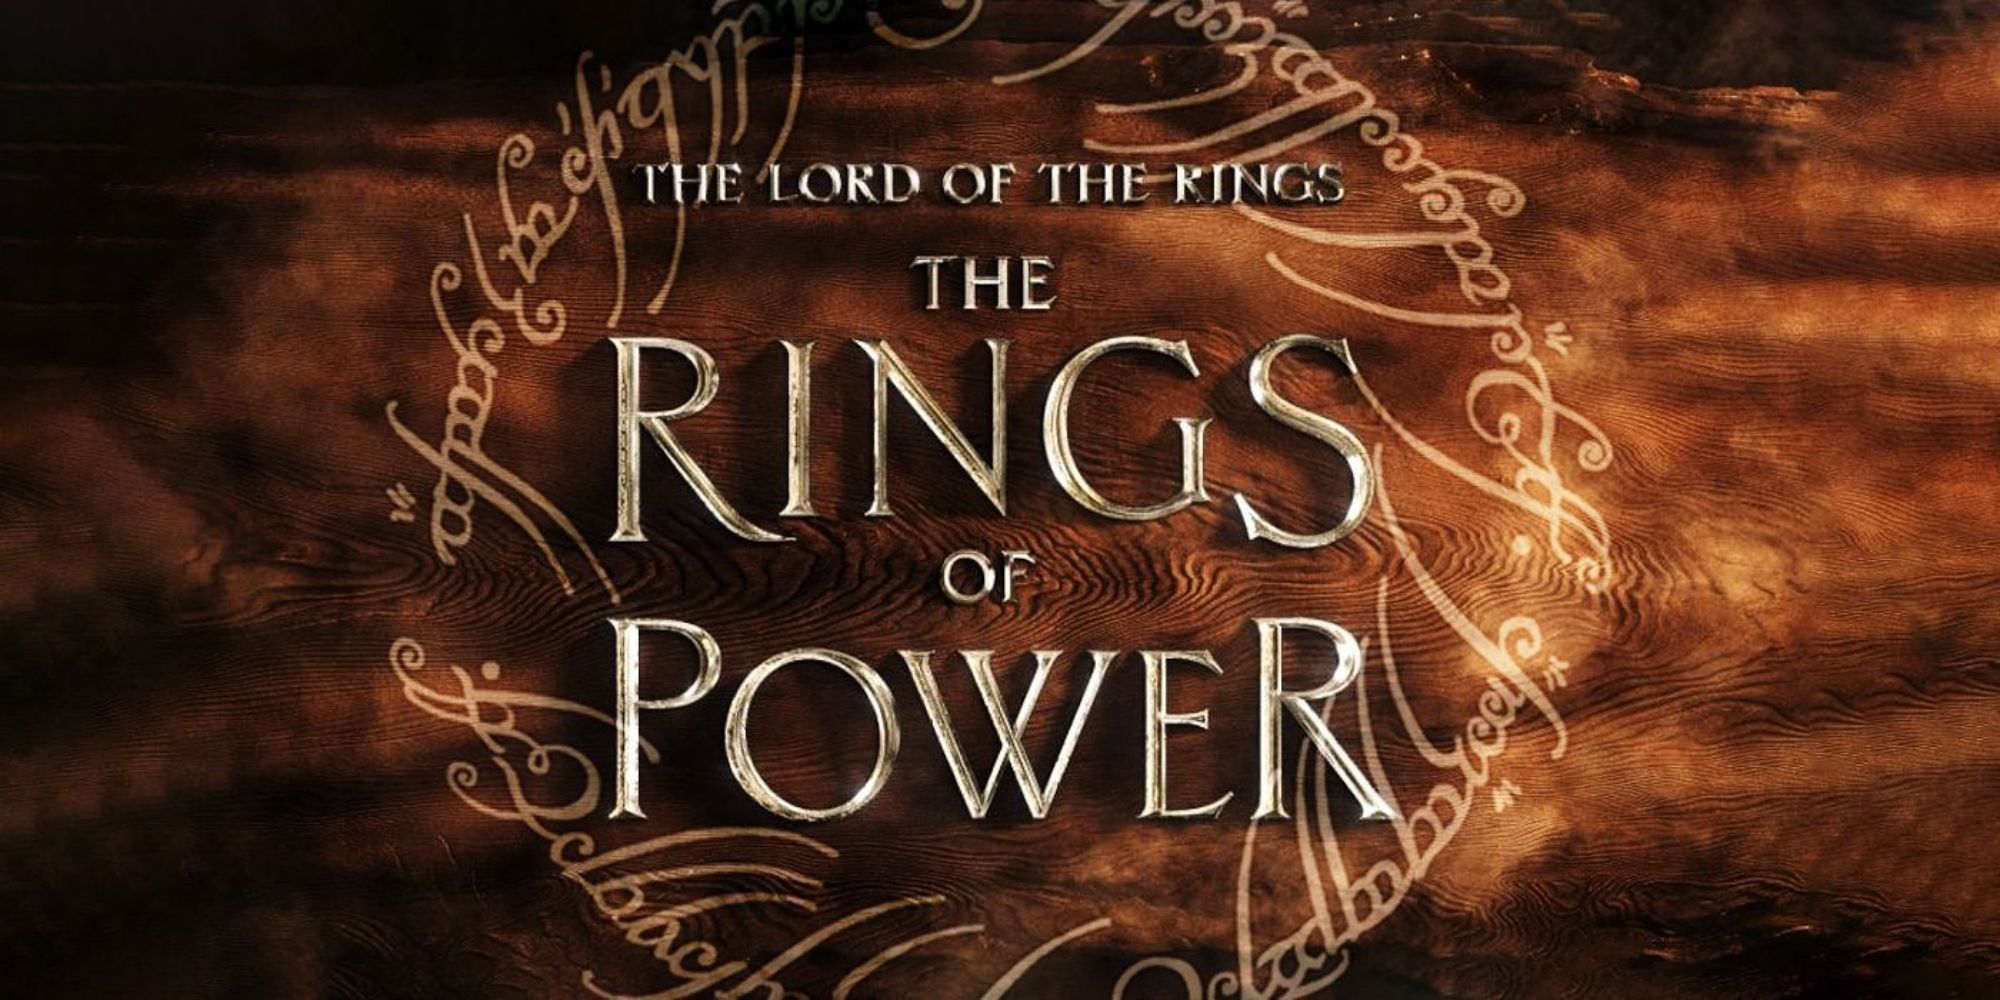 Lord of the Rings: The Rings of Power' Season 2 Adds Eight to Cast